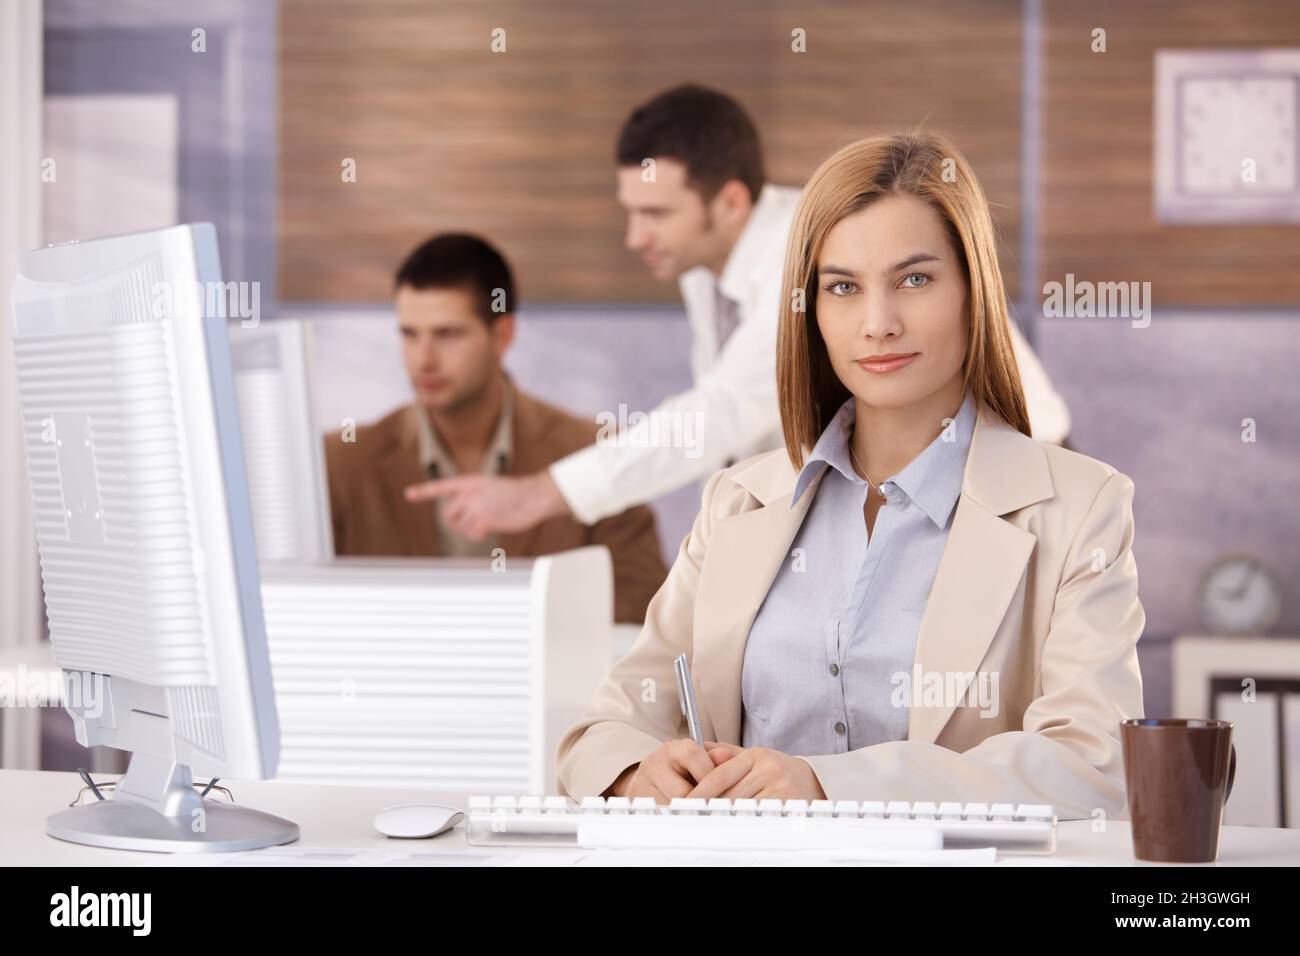 Pretty businesswoman at training course smiling Stock Photo